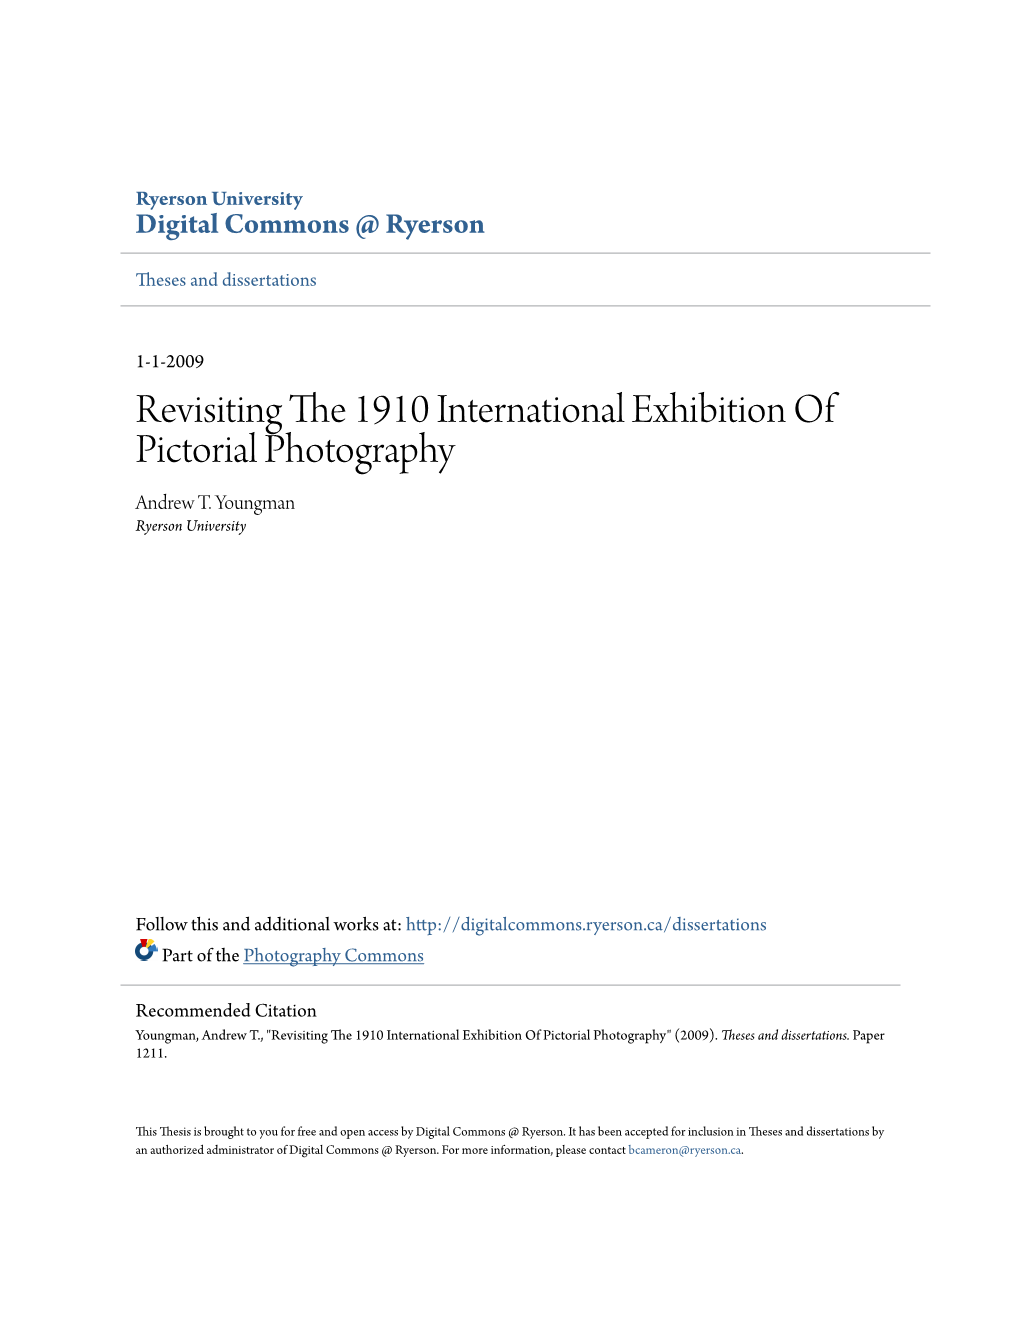 Revisiting the 1910 International Exhibition of Pictorial Photography